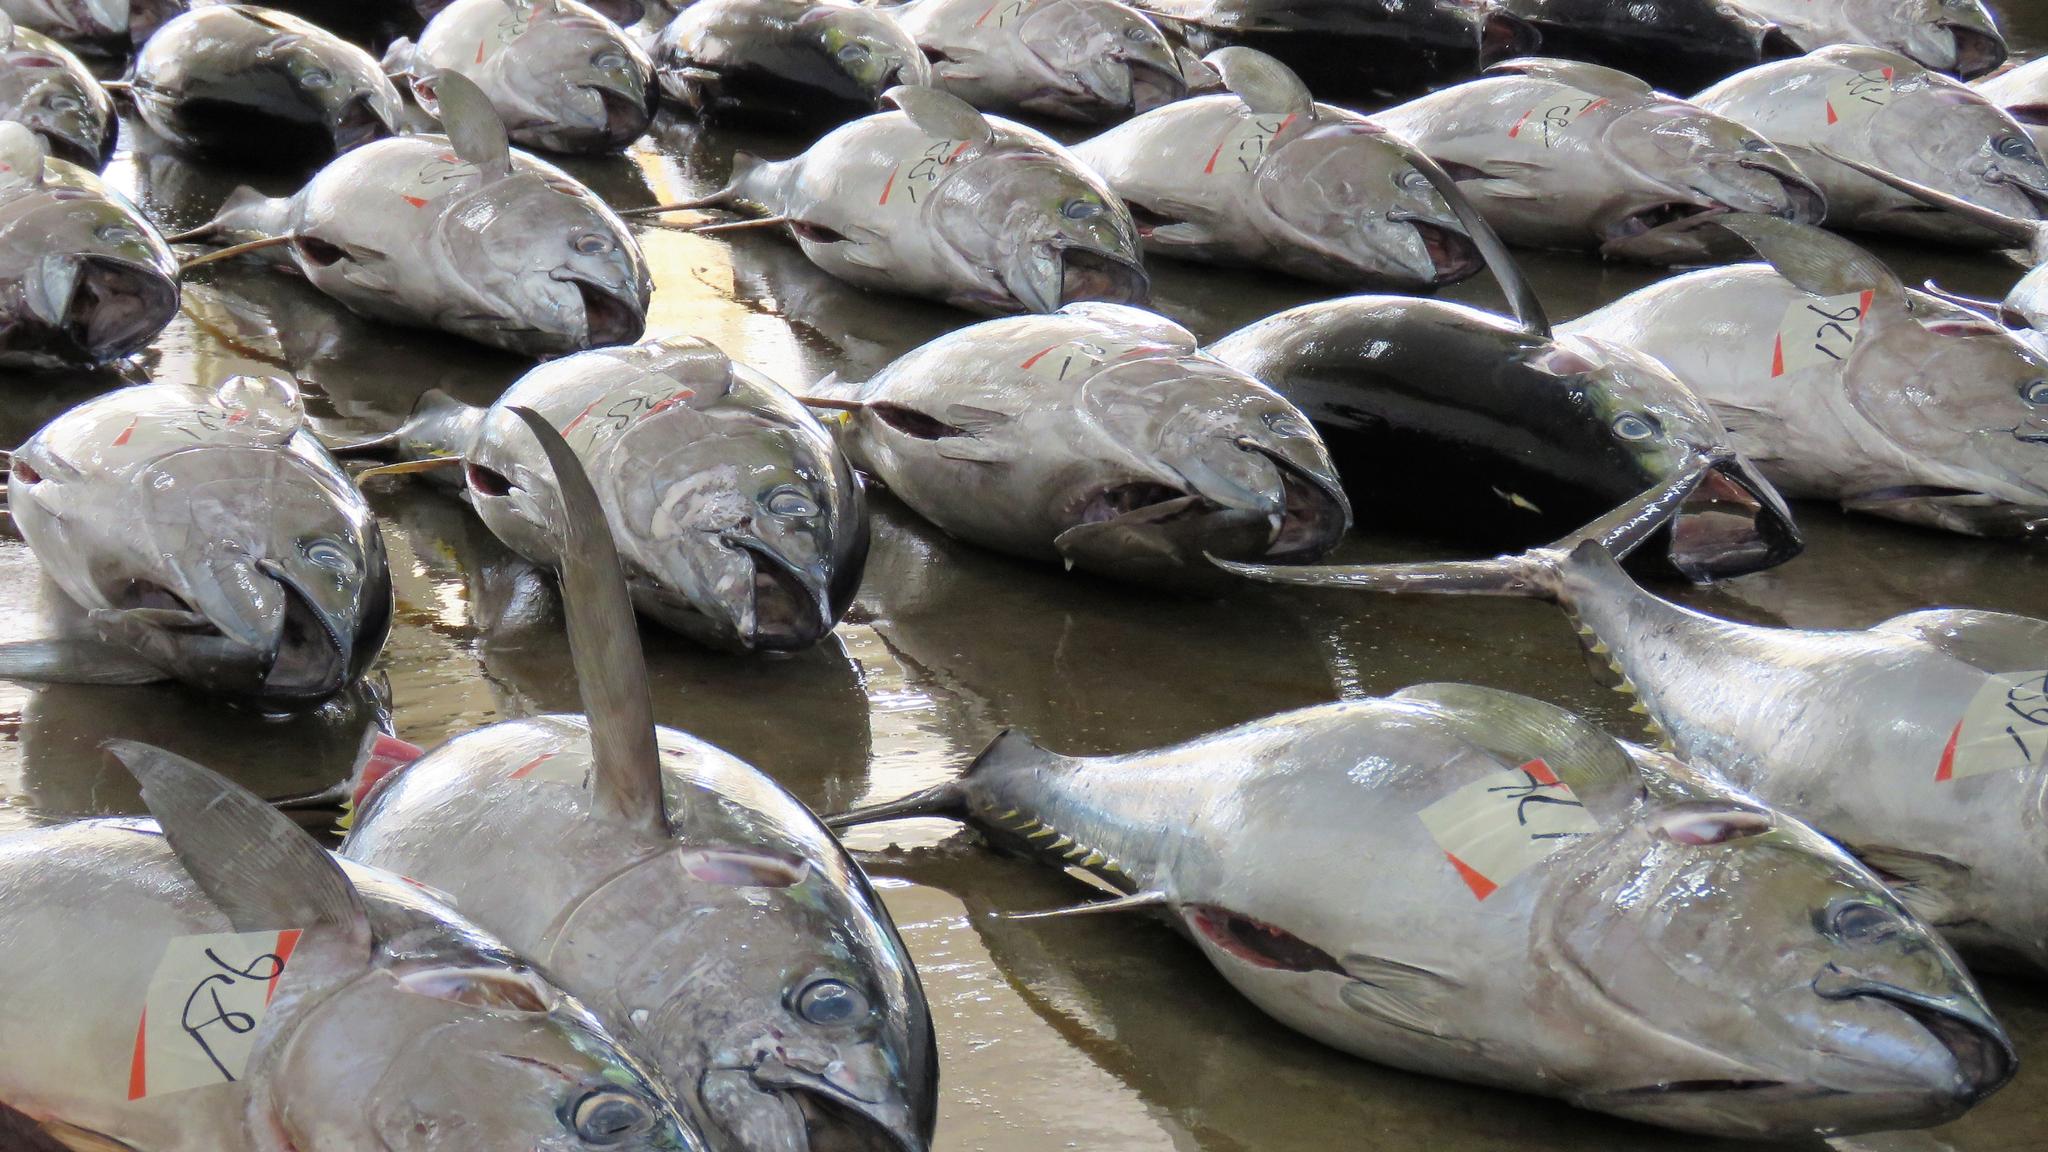 Tuna auction is catch of the day | The Australian